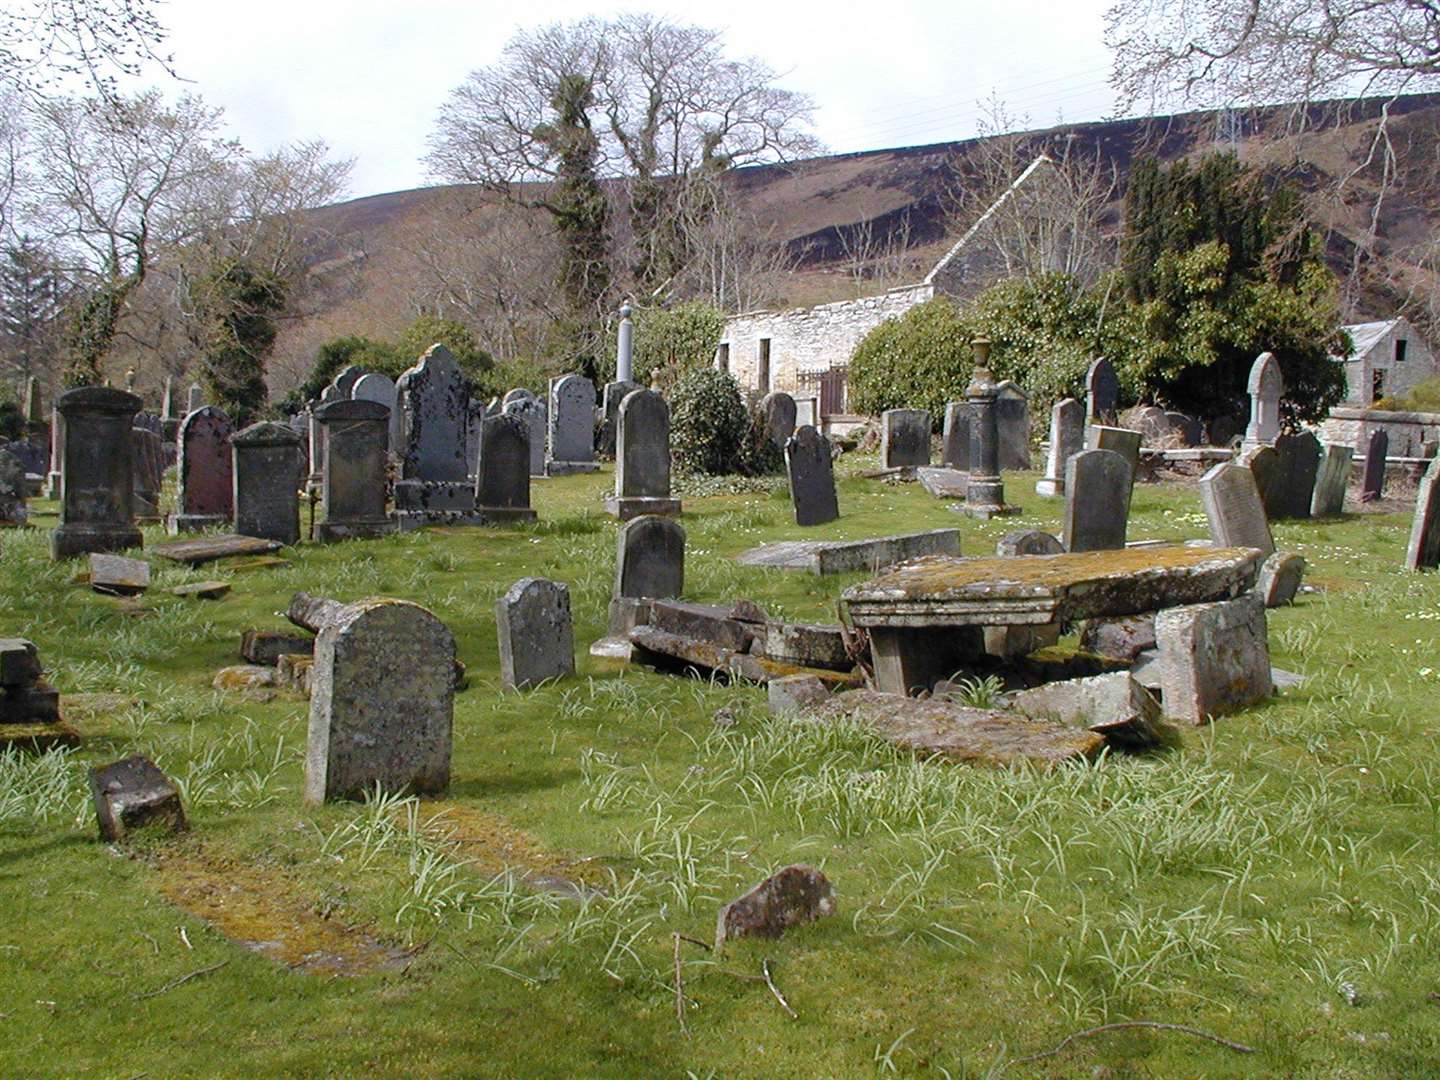 The "beautiful and well-loved graveyard" is visited by people from across the world.